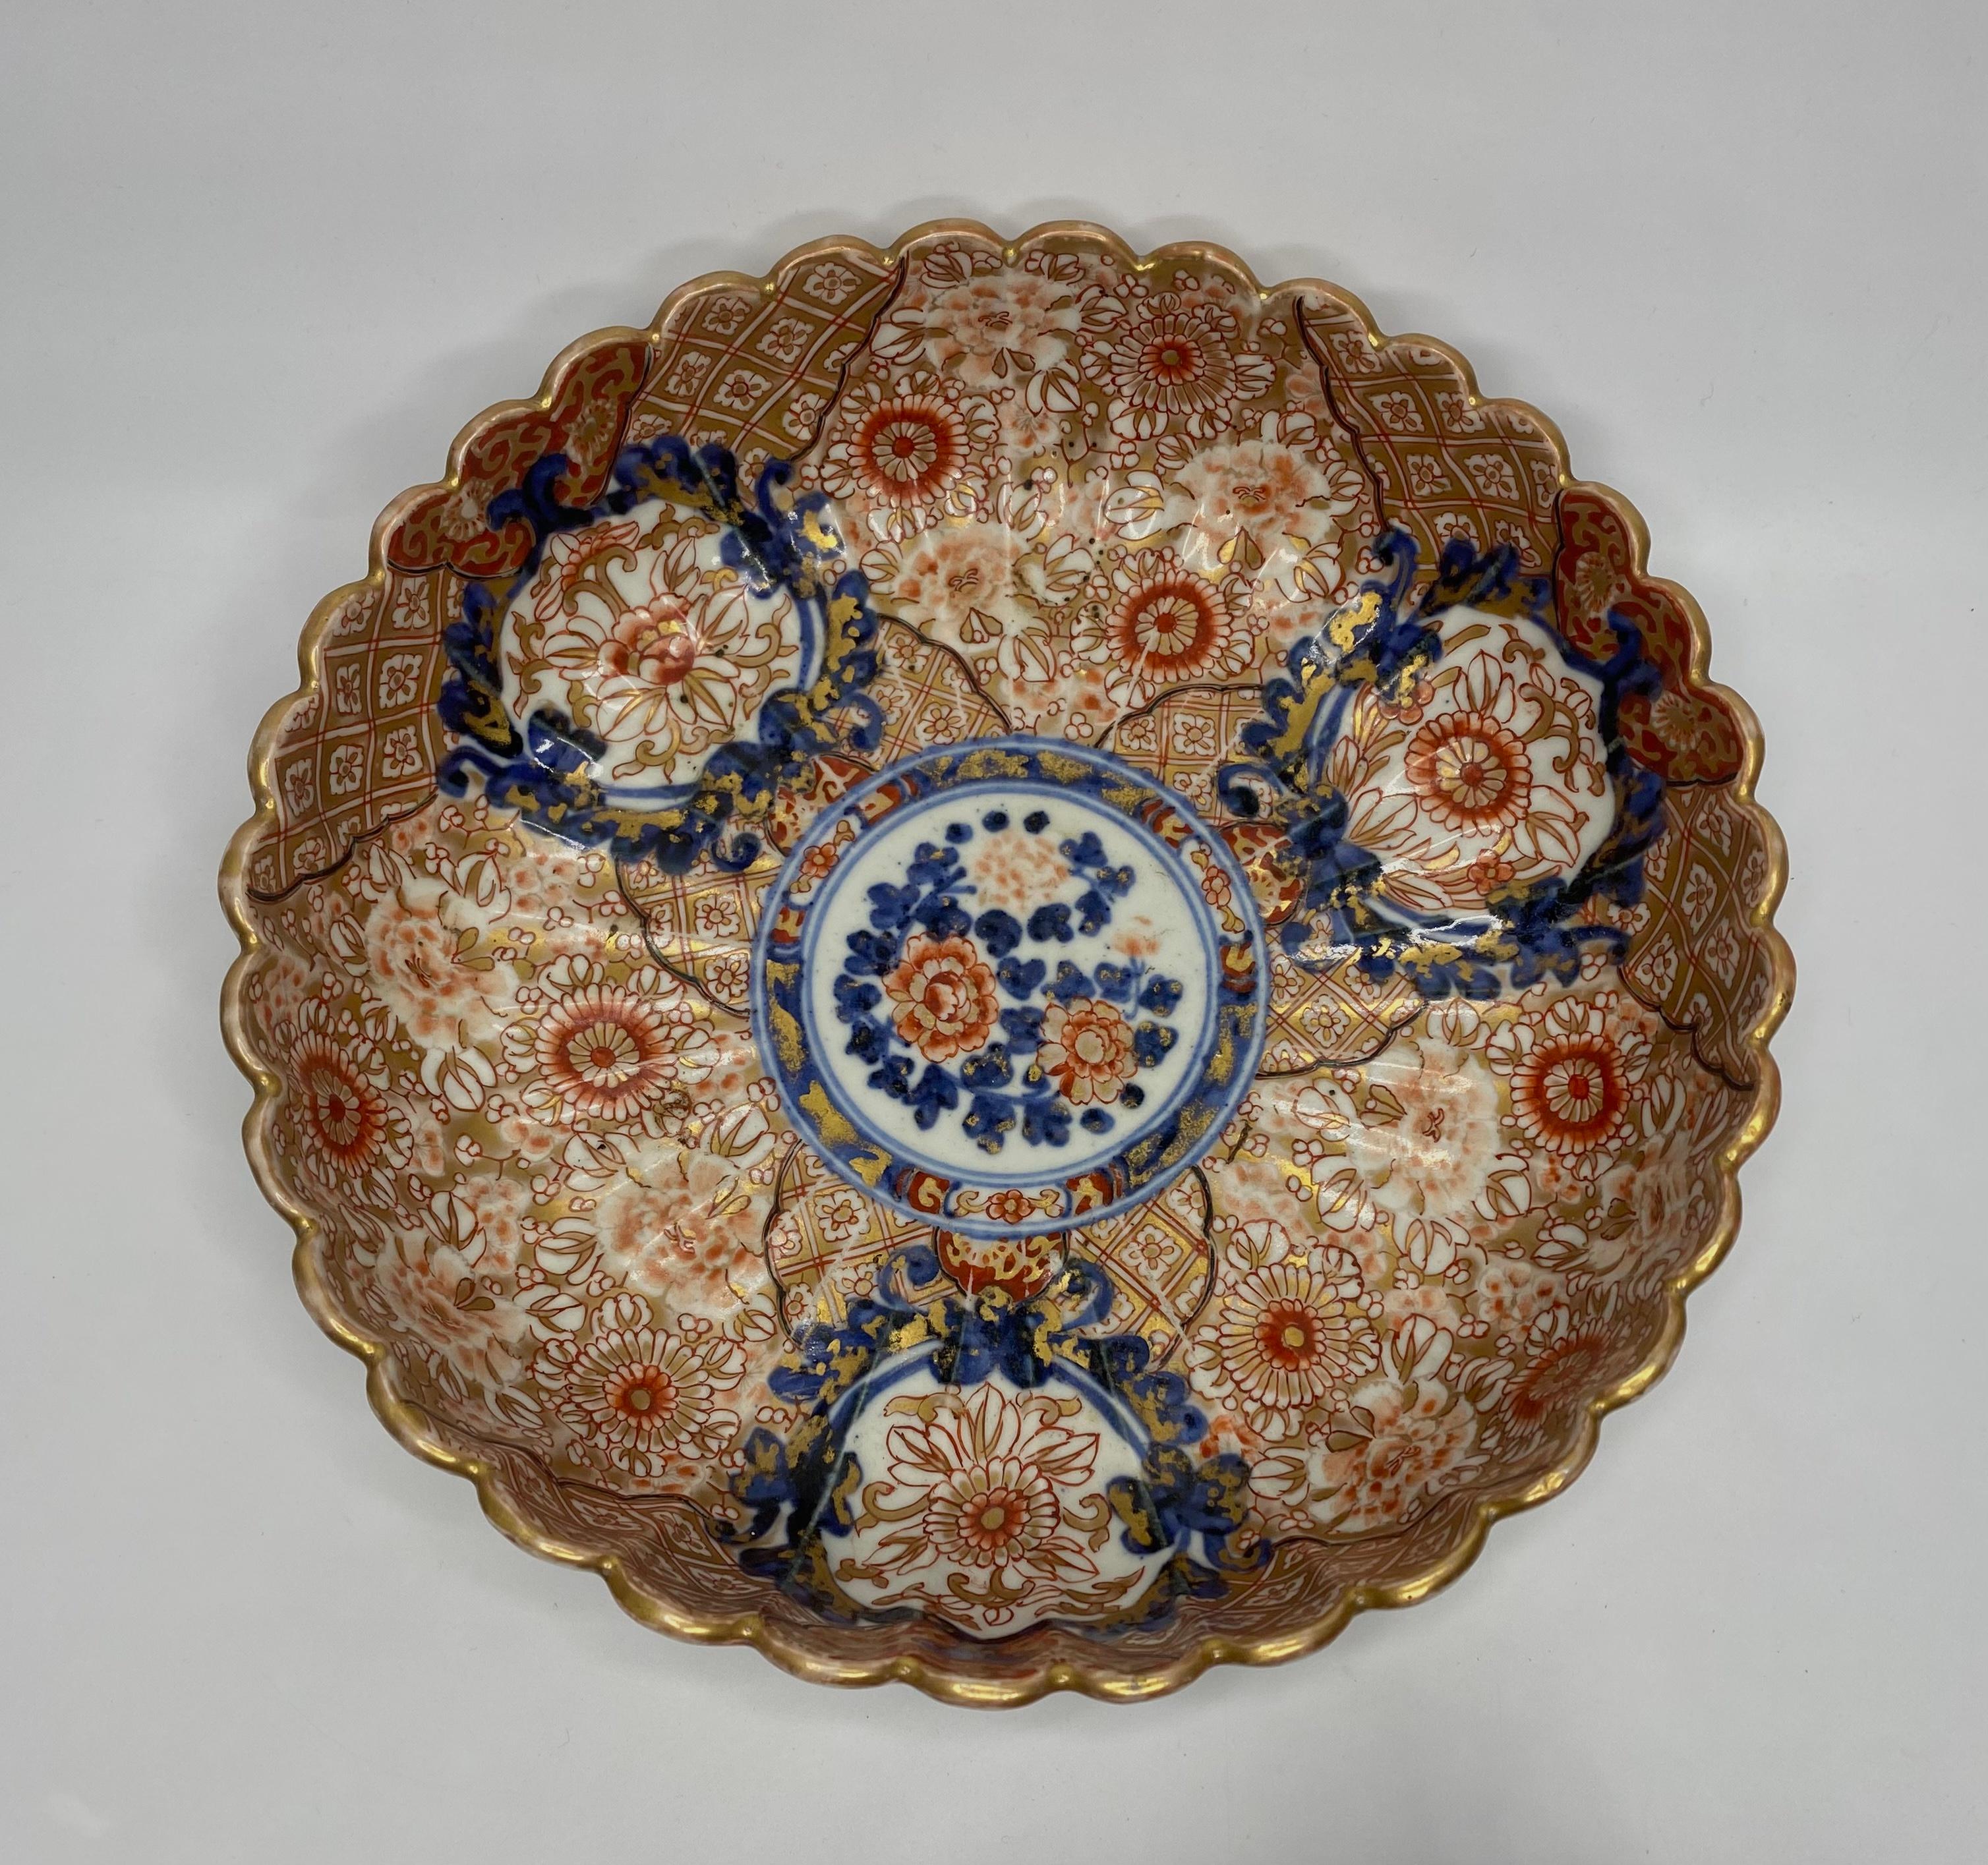 A Japanese Imari bowl, Arita, circa 1890, Meiji Period. The heavily fluted bowl, well decorated in typical Imari style, with panels of stylised flowers, upon a heavily gilded ground of textile motif.
The exterior of the bowl, similarly